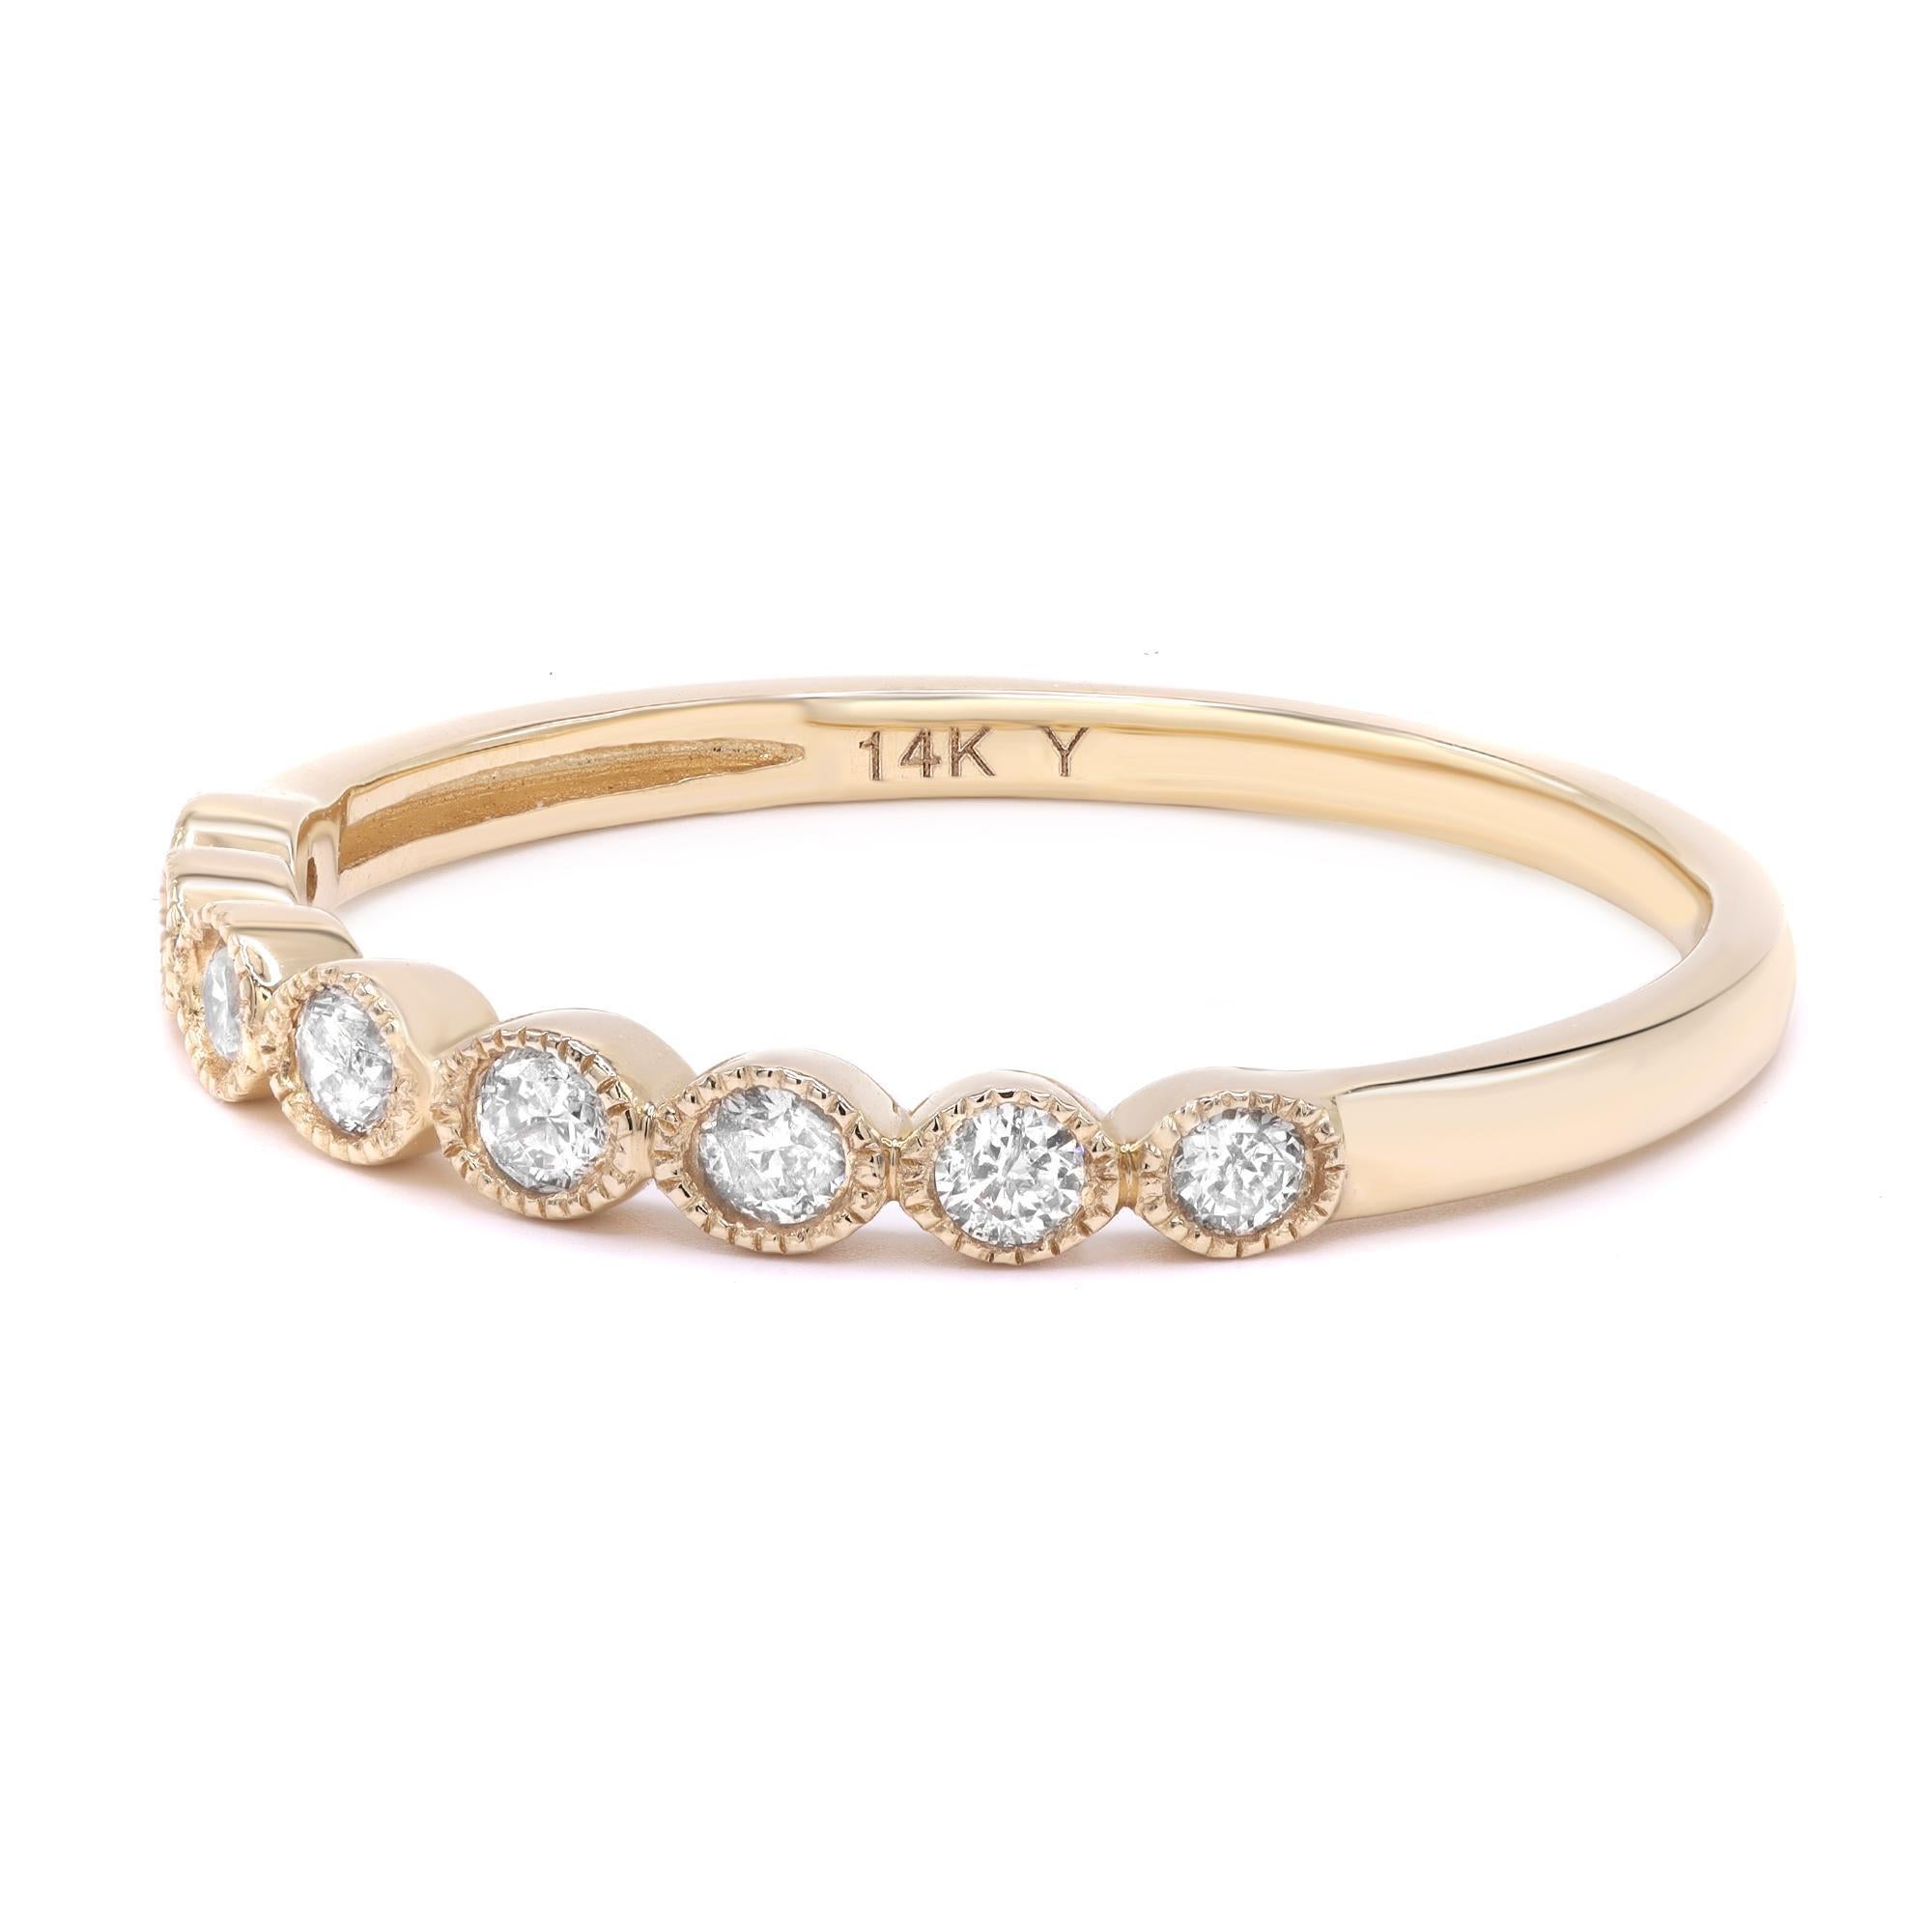 Rachel Koen Round Cut Diamond Ring 14K Yellow Gold 0.187cttw In New Condition For Sale In New York, NY